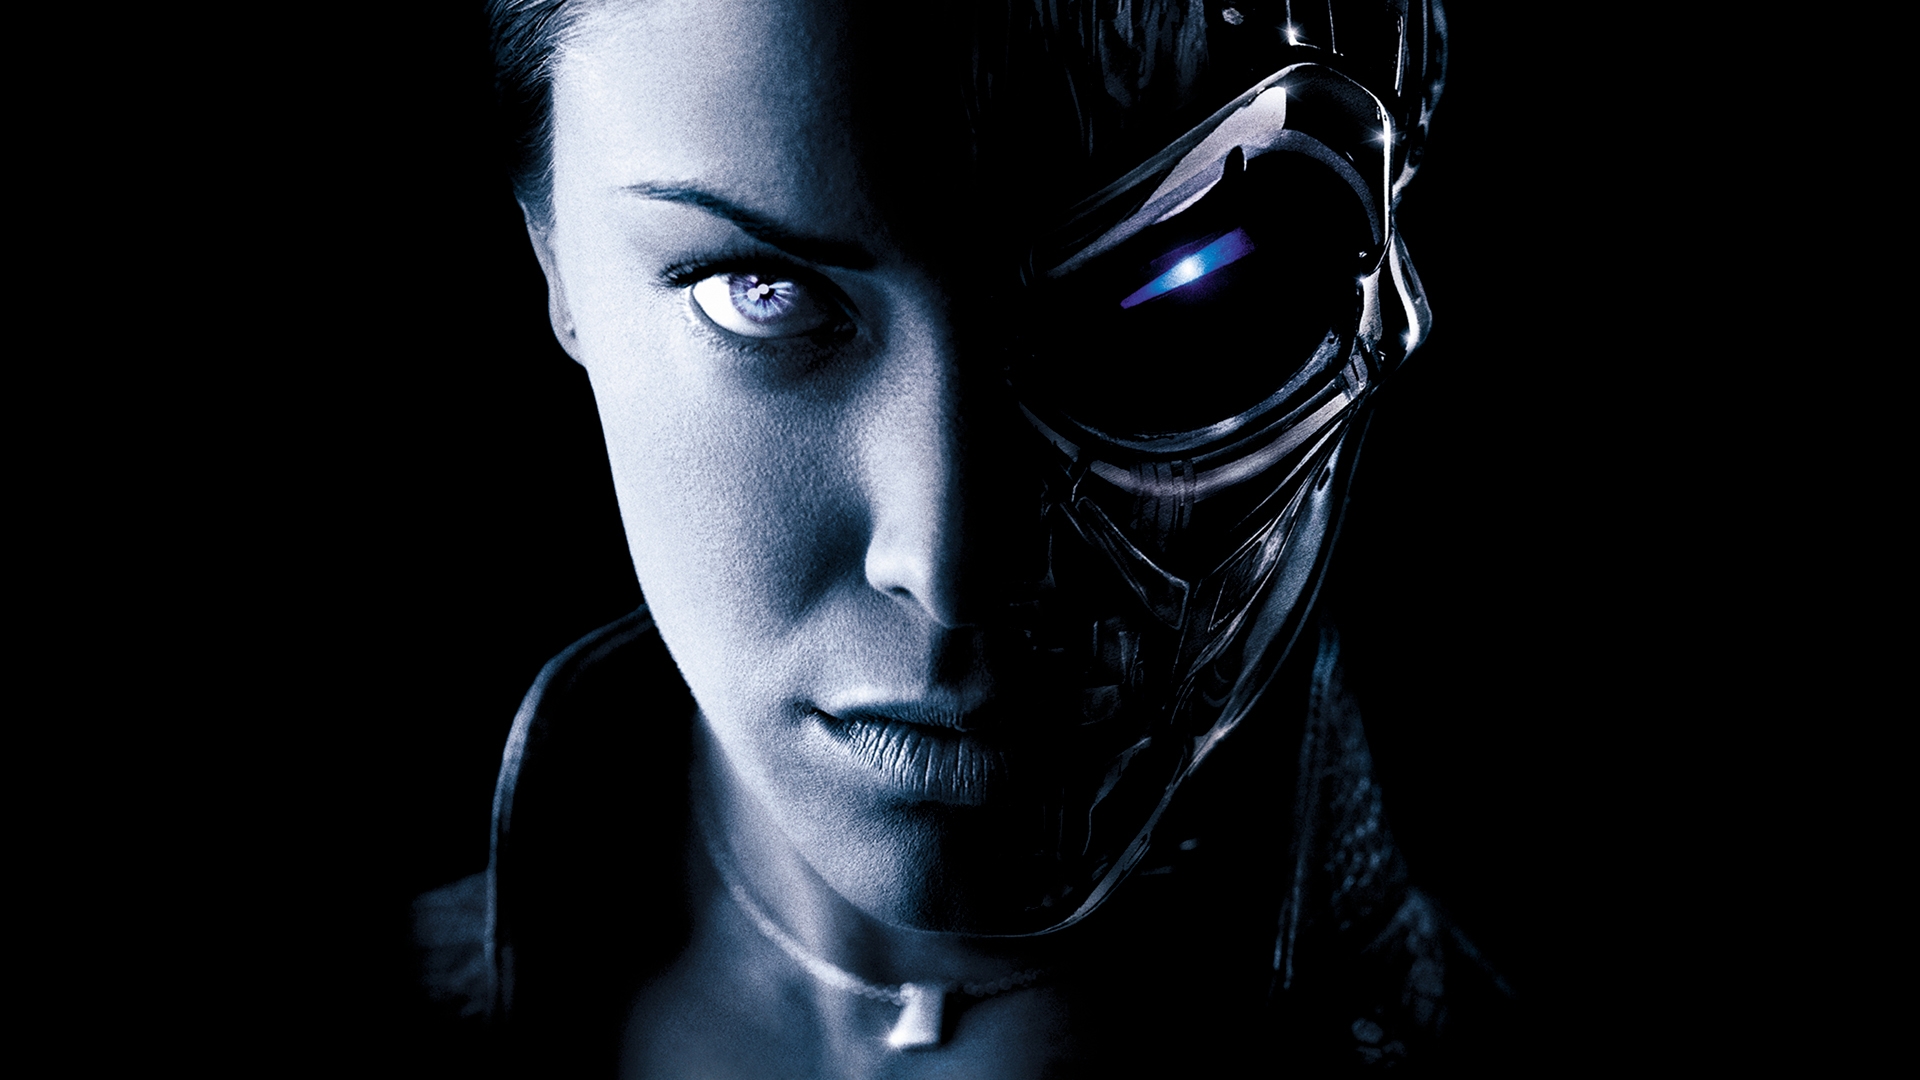 Cyborg Wallpapers and Background Images   stmednet